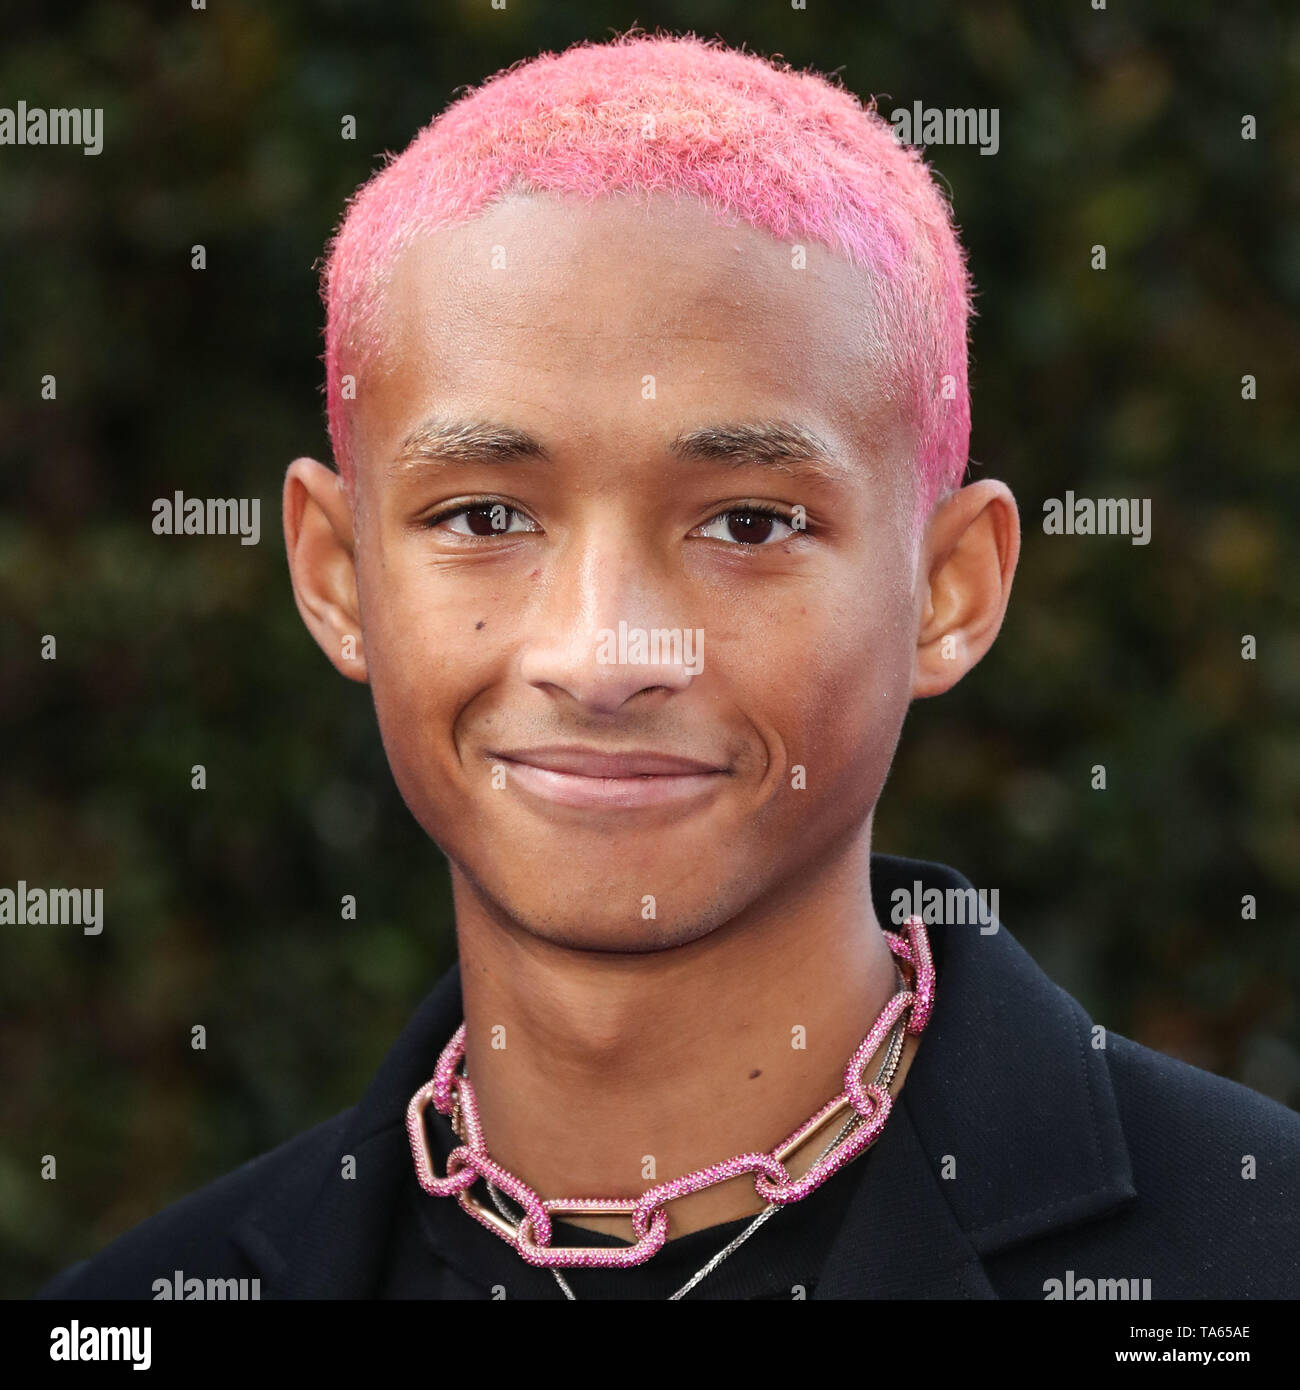 Hollywood, United States. 21st May, 2019. HOLLYWOOD, LOS ANGELES,  CALIFORNIA, USA - MAY 21: Actor Jaden Smith wearing Louis Vuitton arrives  at the World Premiere Of Disney's 'Aladdin' held at the El